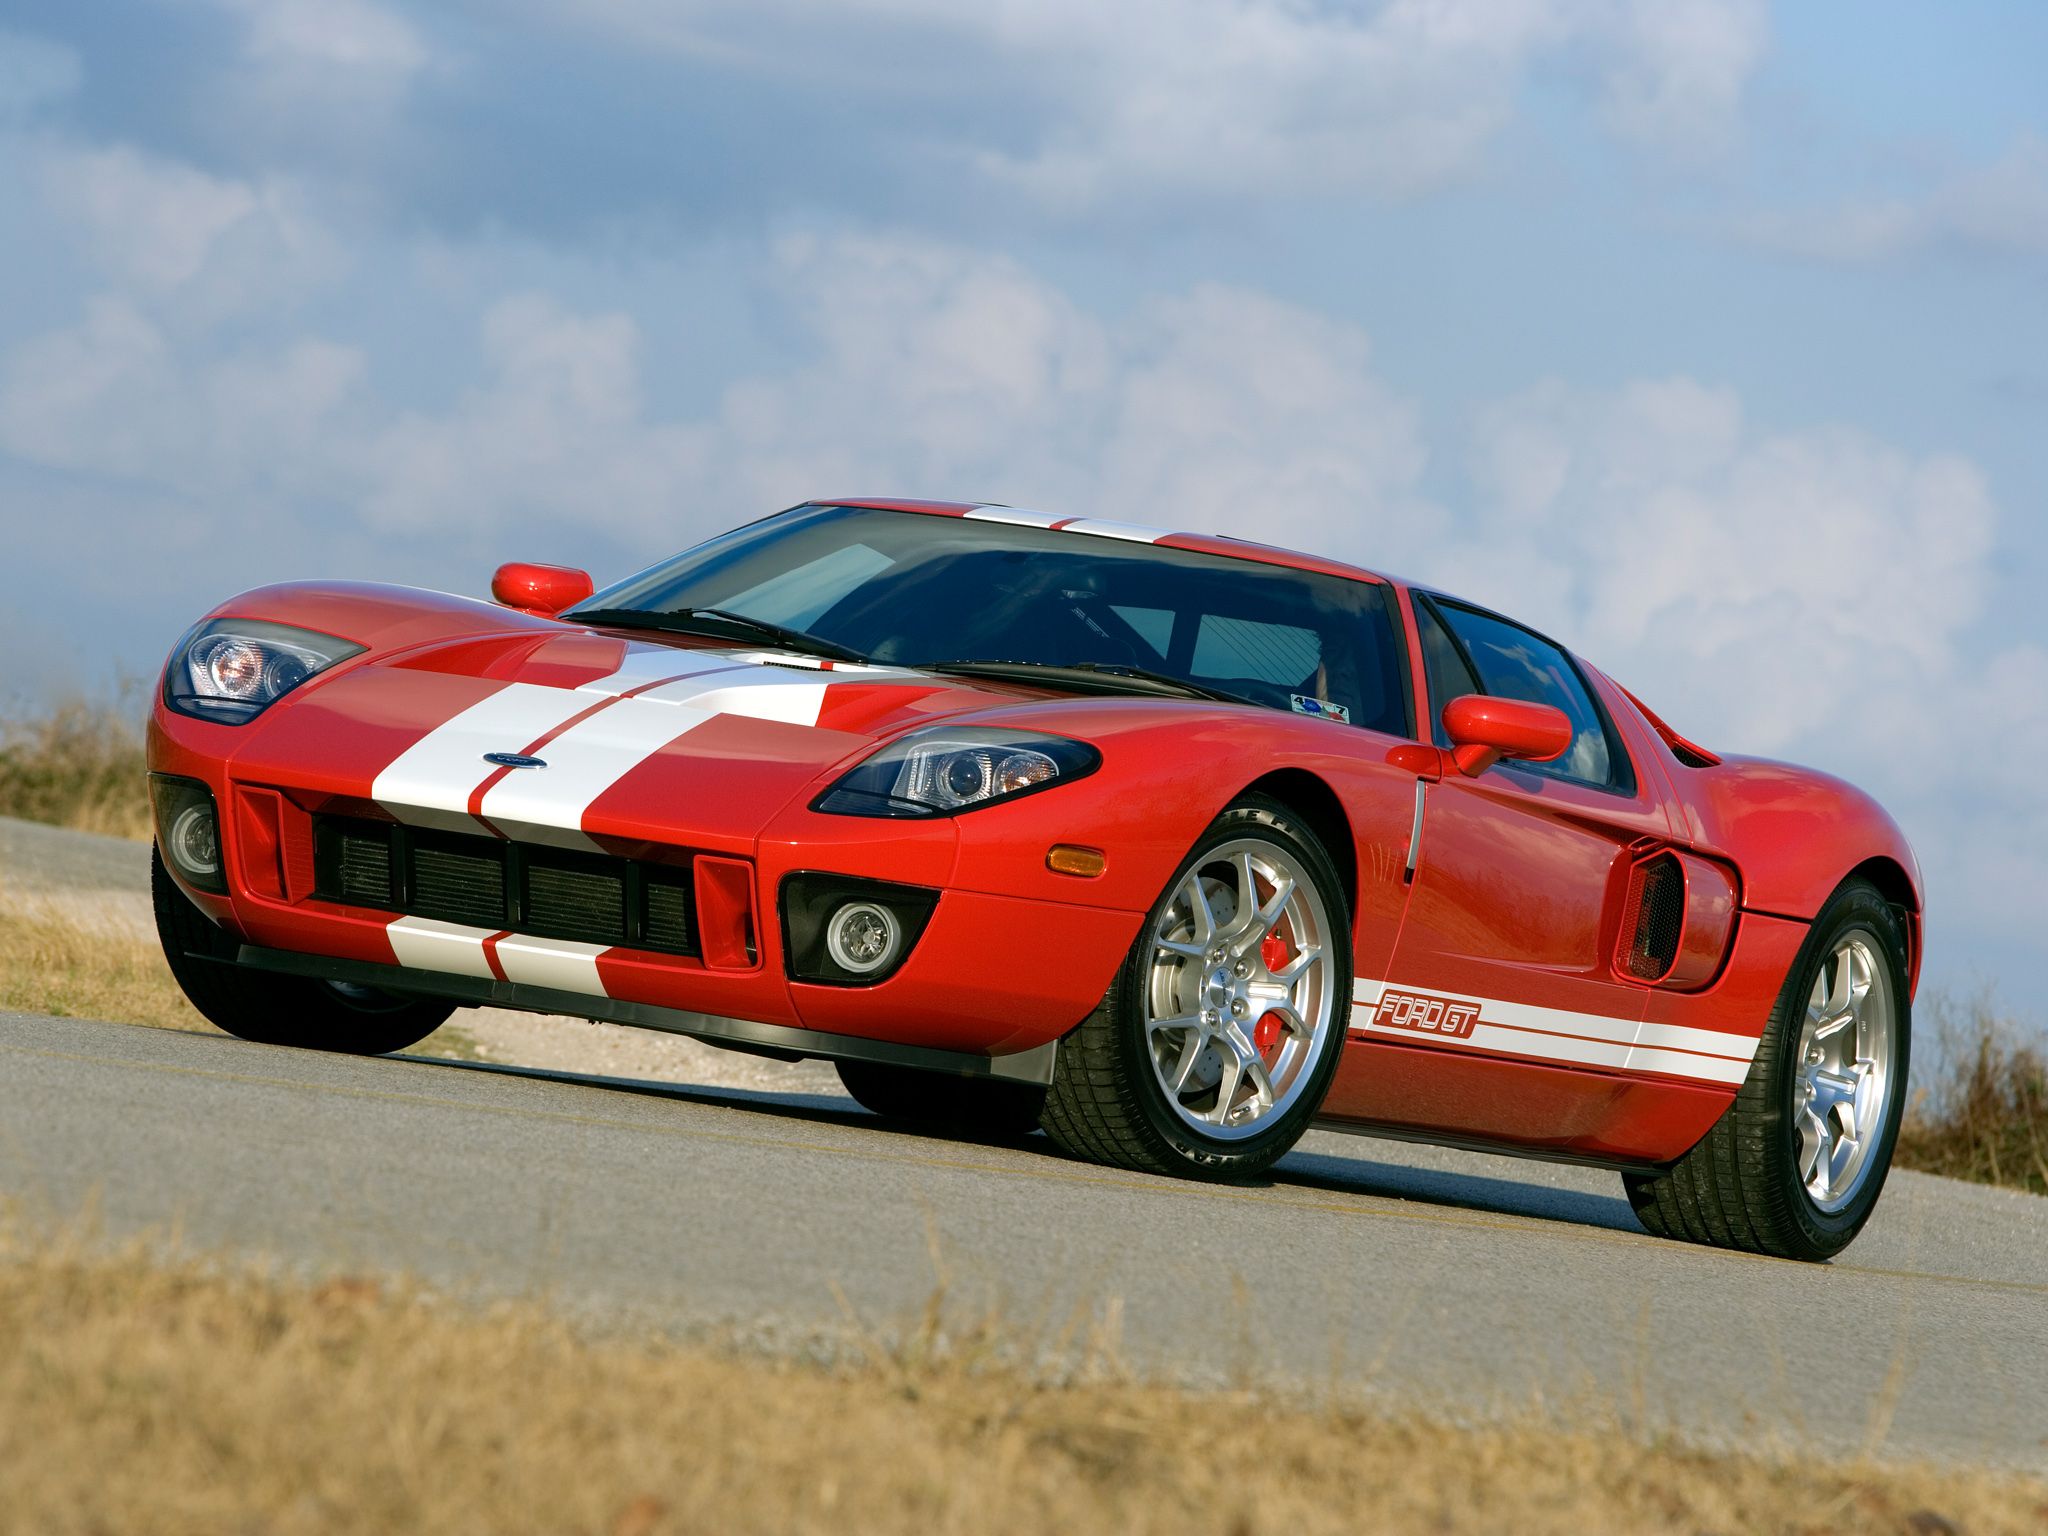 hennessey, Ford, Gt700, 2007, Red, Headlights, Stripes, Supercars Wallpaper